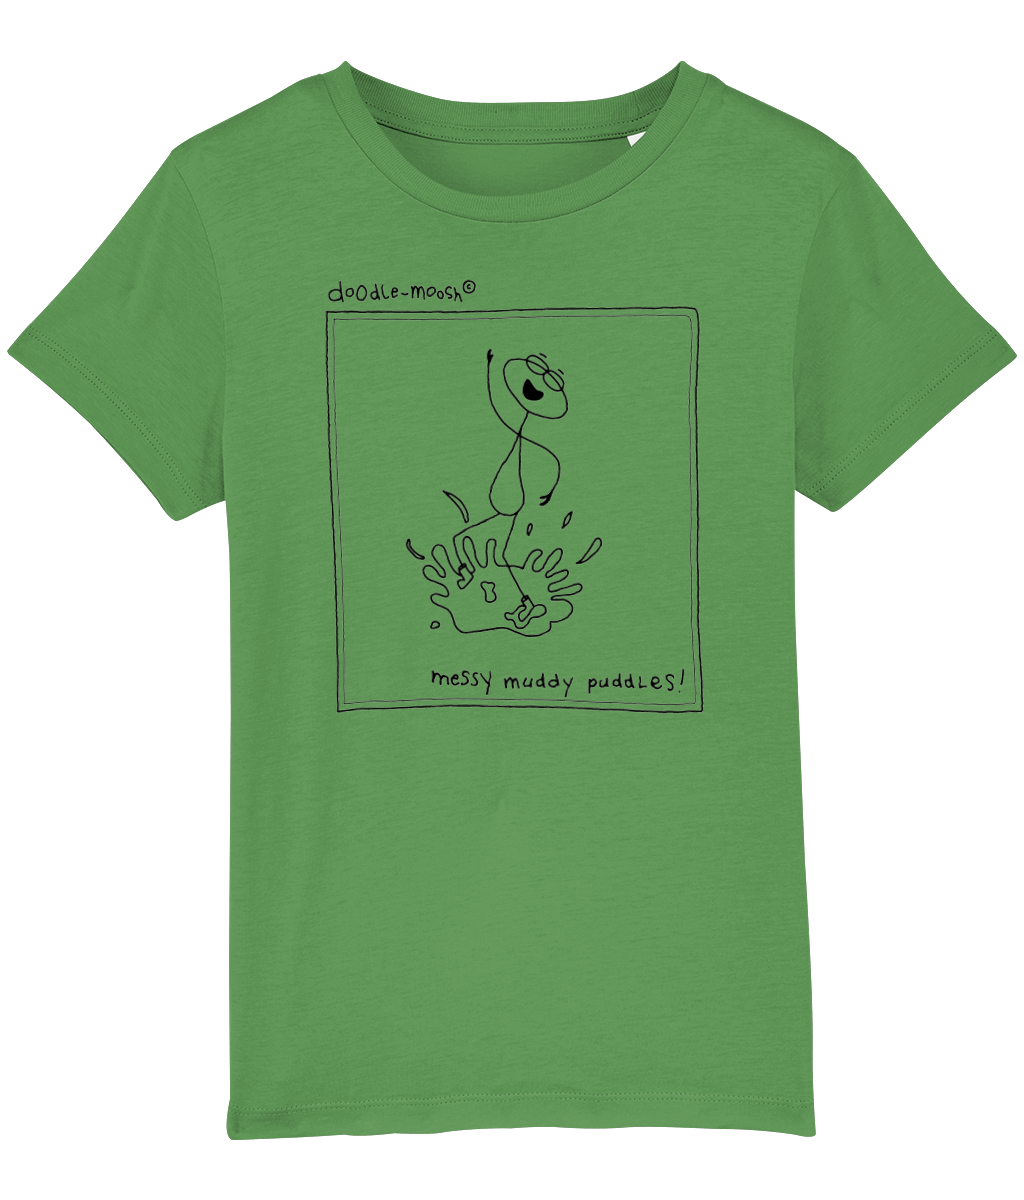 Messy muddy puddles t-shirt, green with black